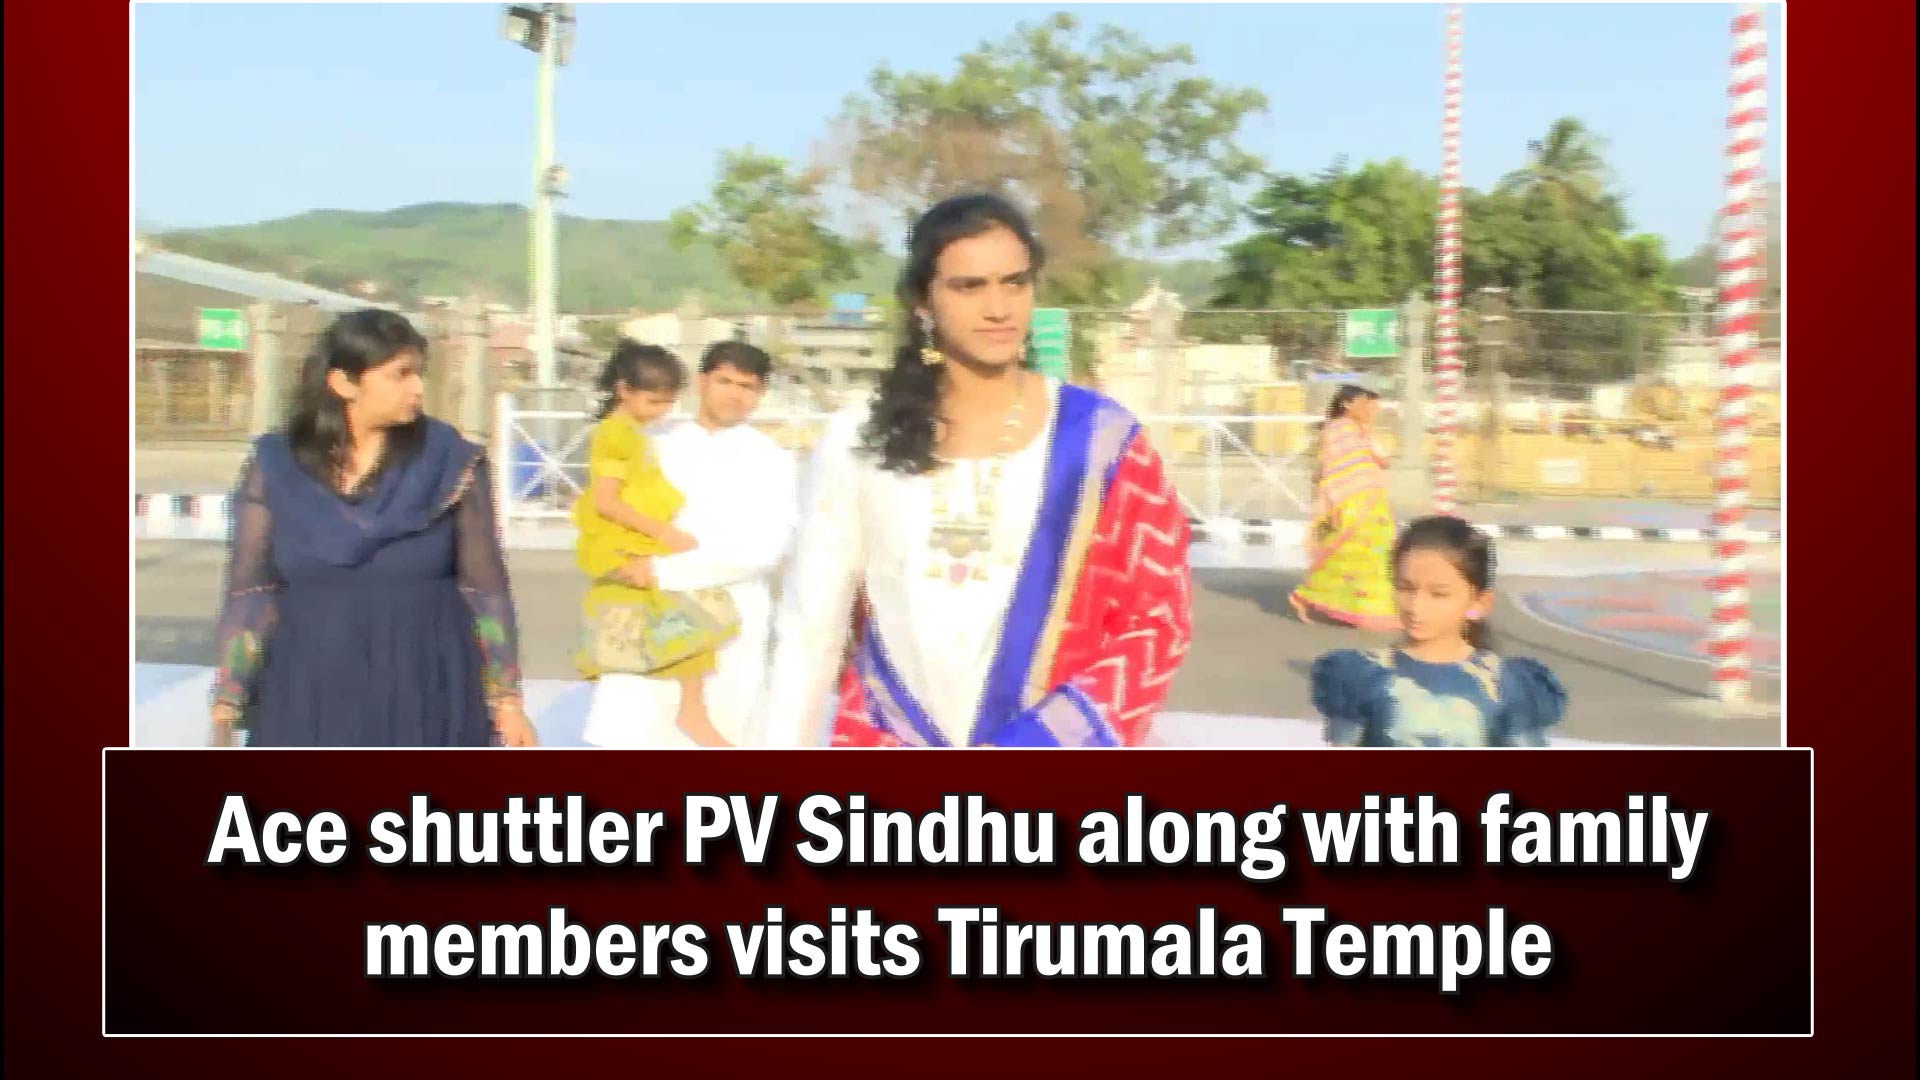 Ace shuttler PV Sindhu along with family members visits Tirumala Temple